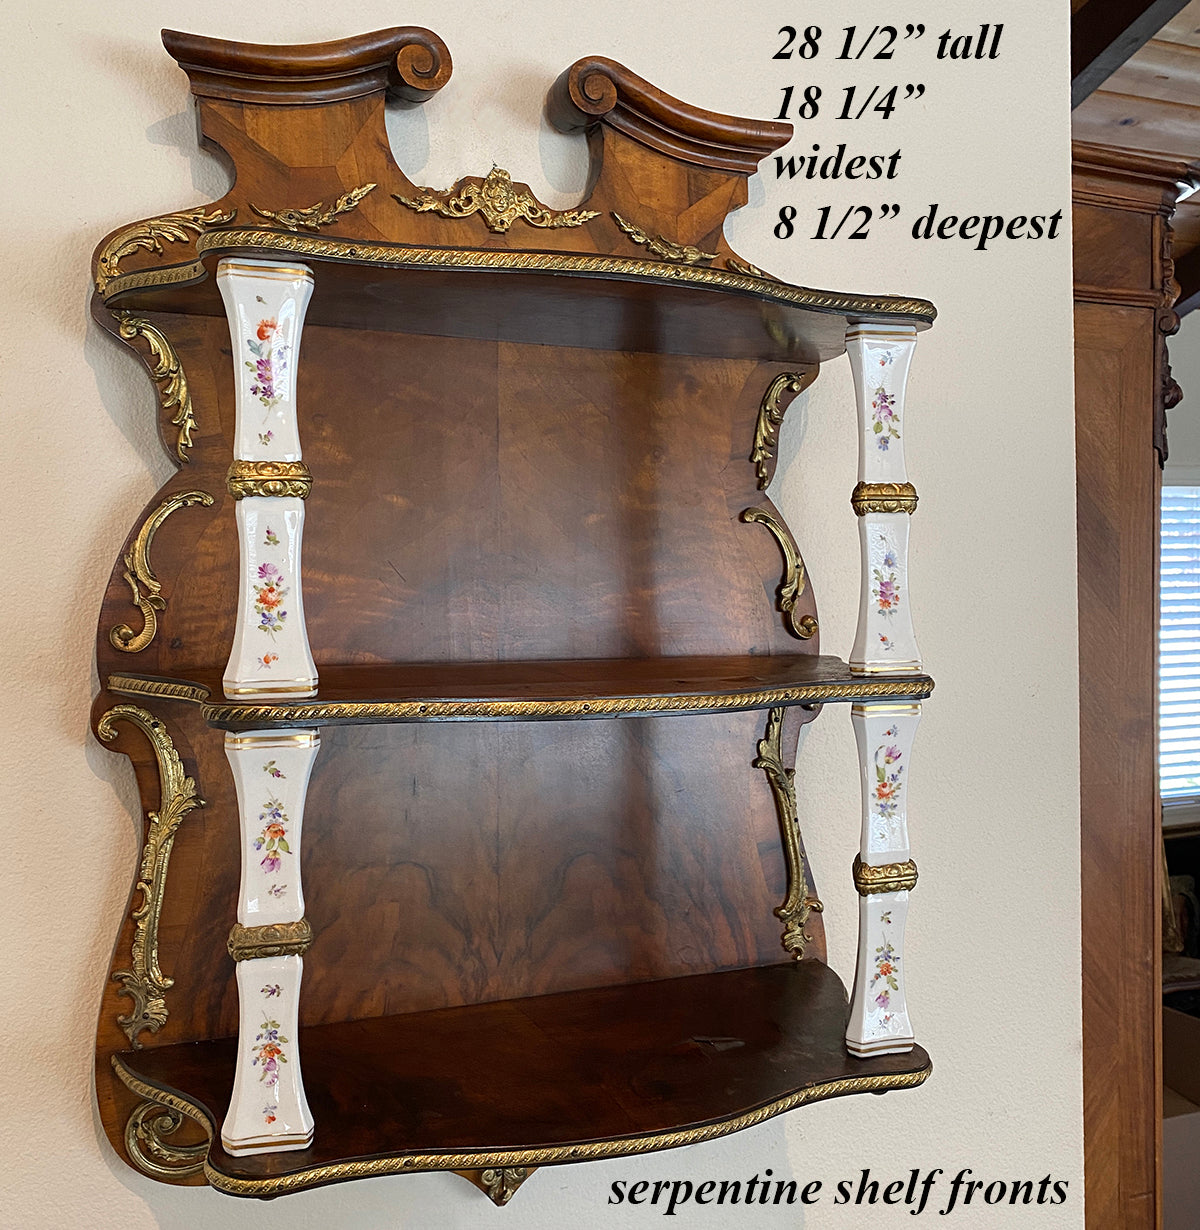 Fine 19th c. Antique French 3-Tier Kingwood and Ormolu, Porcelain Wall Shelf, 28.5" Tall, Louis XVI Aesthetic